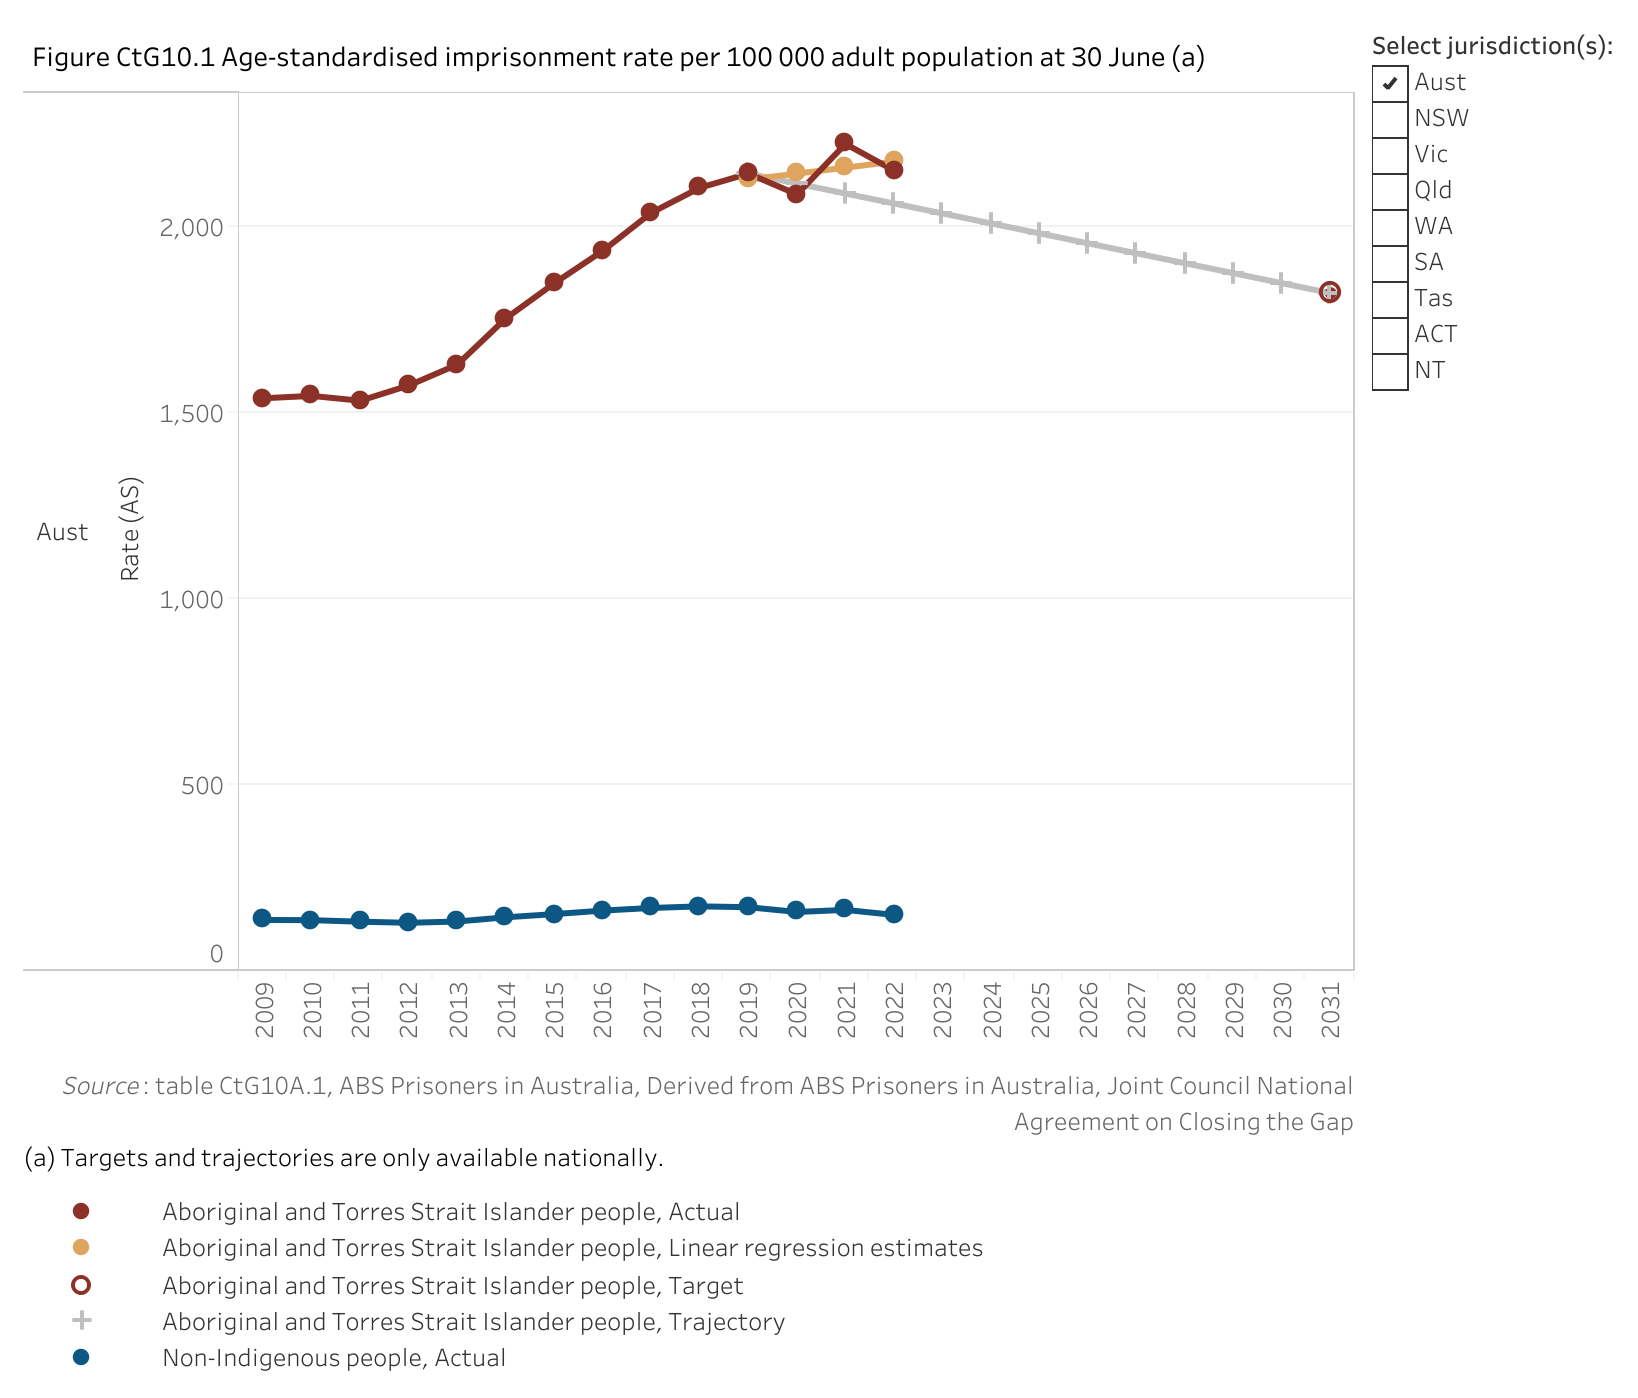 Figure CtG10.1 shows the age-standardised imprisonment rate per 100 000 adult population at 30 June. More details can be found within the text near this image.